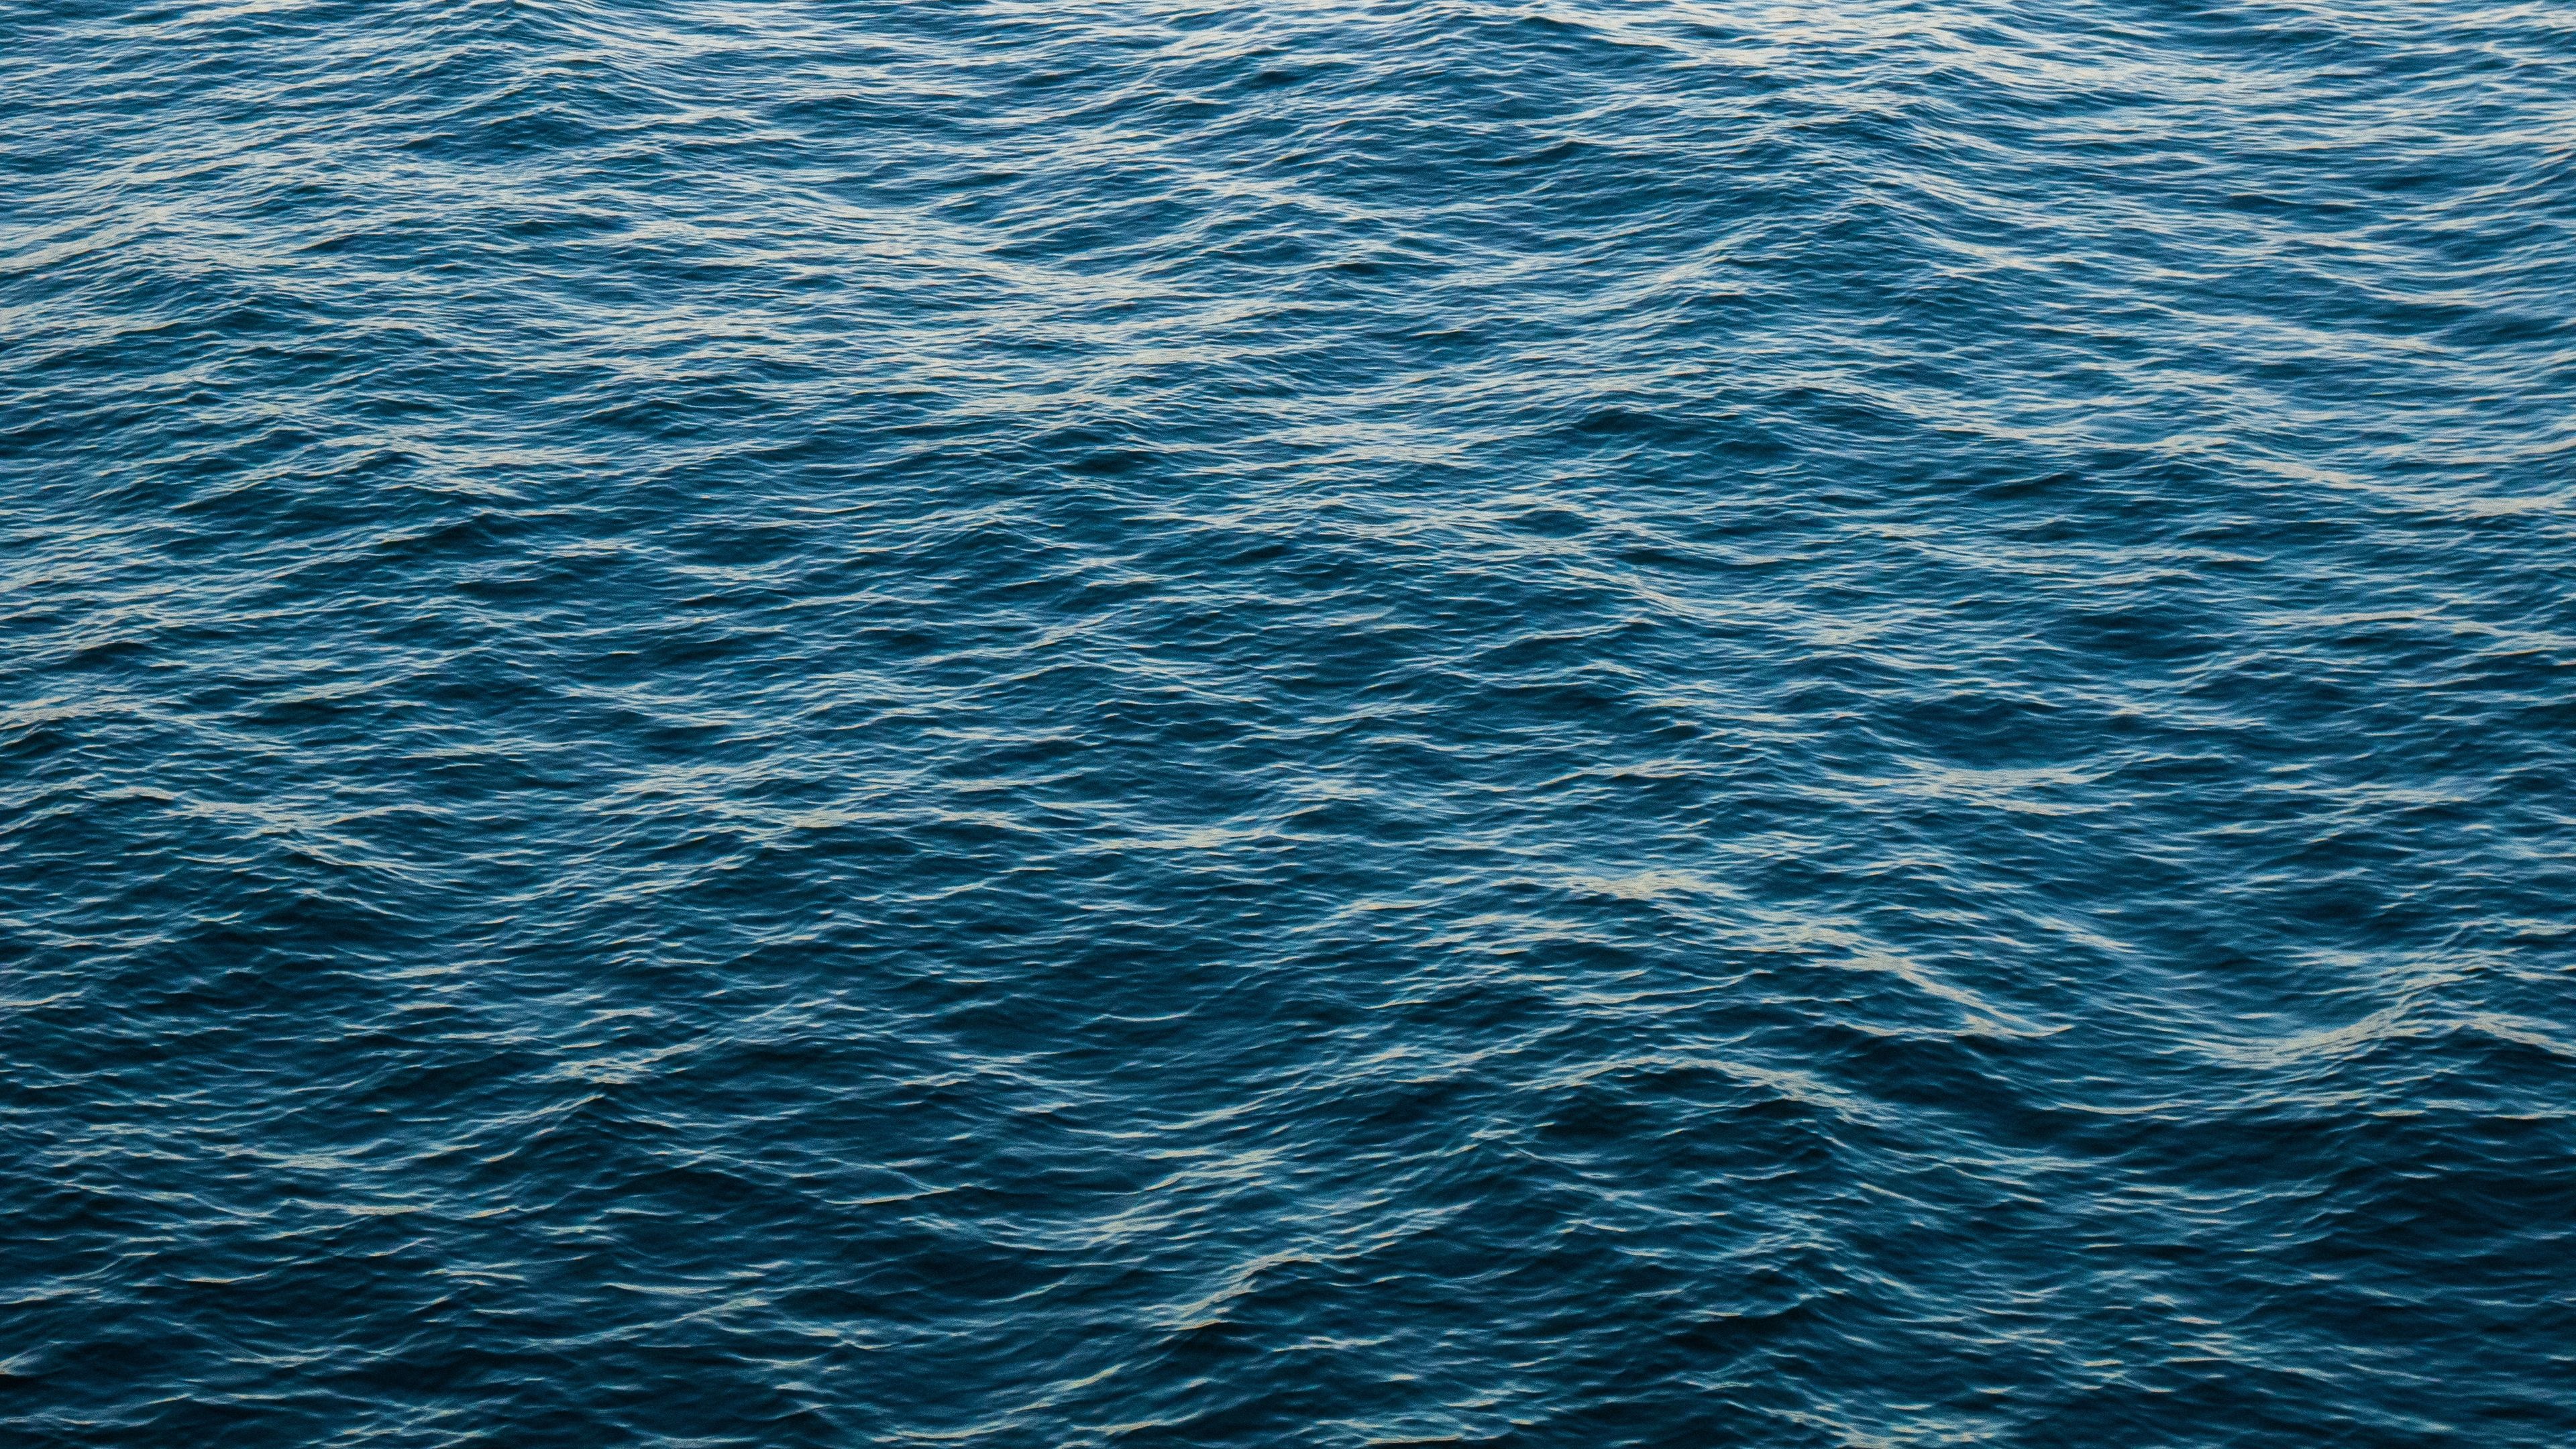 Download wallpaper 3840x2160 water, ripples, sea, waves, surface